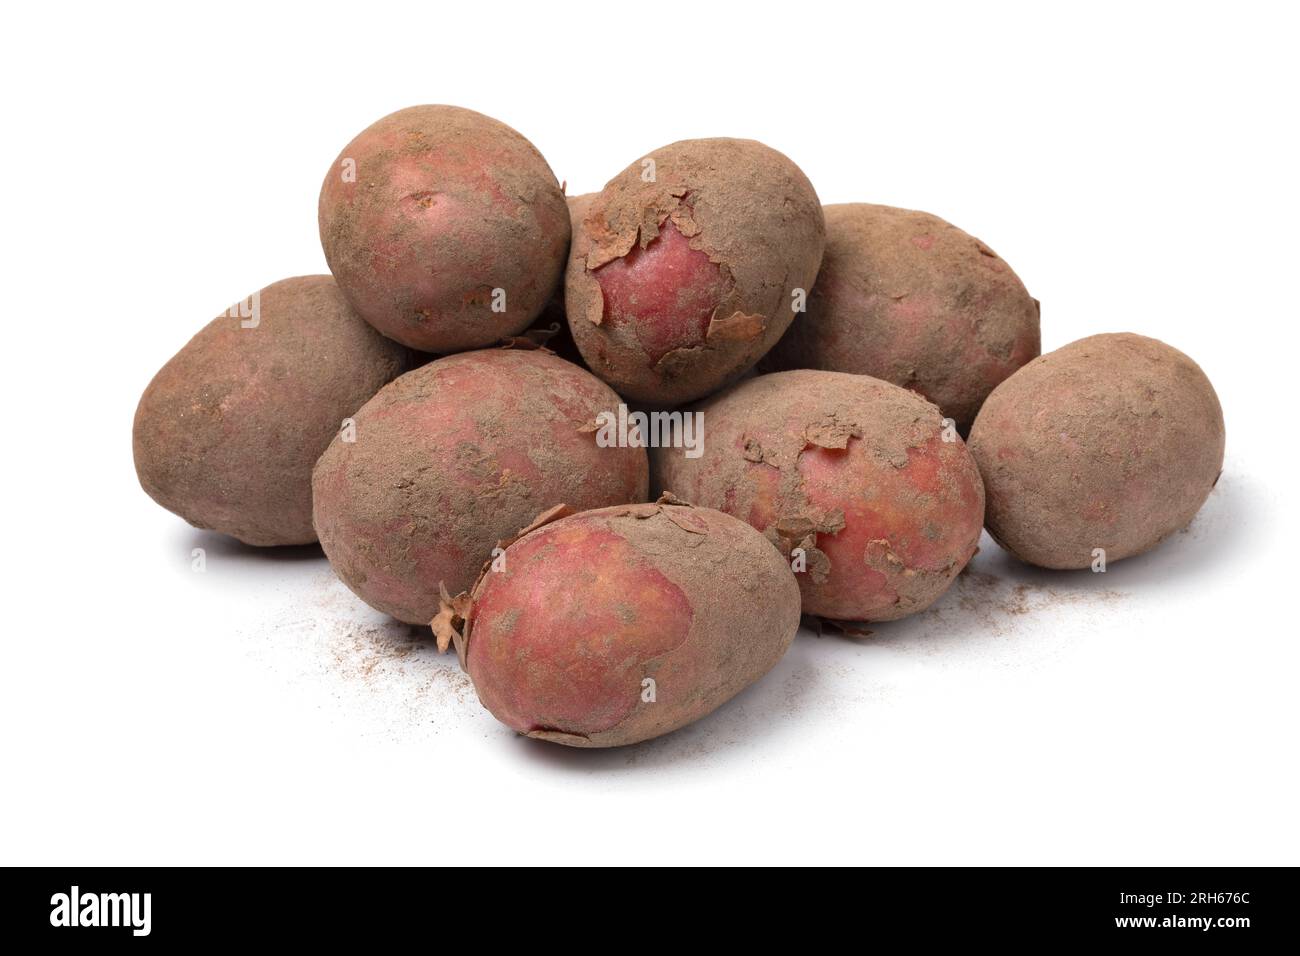 Heap of fresh picked red Alouette potatoes isolated on white background close up Stock Photo